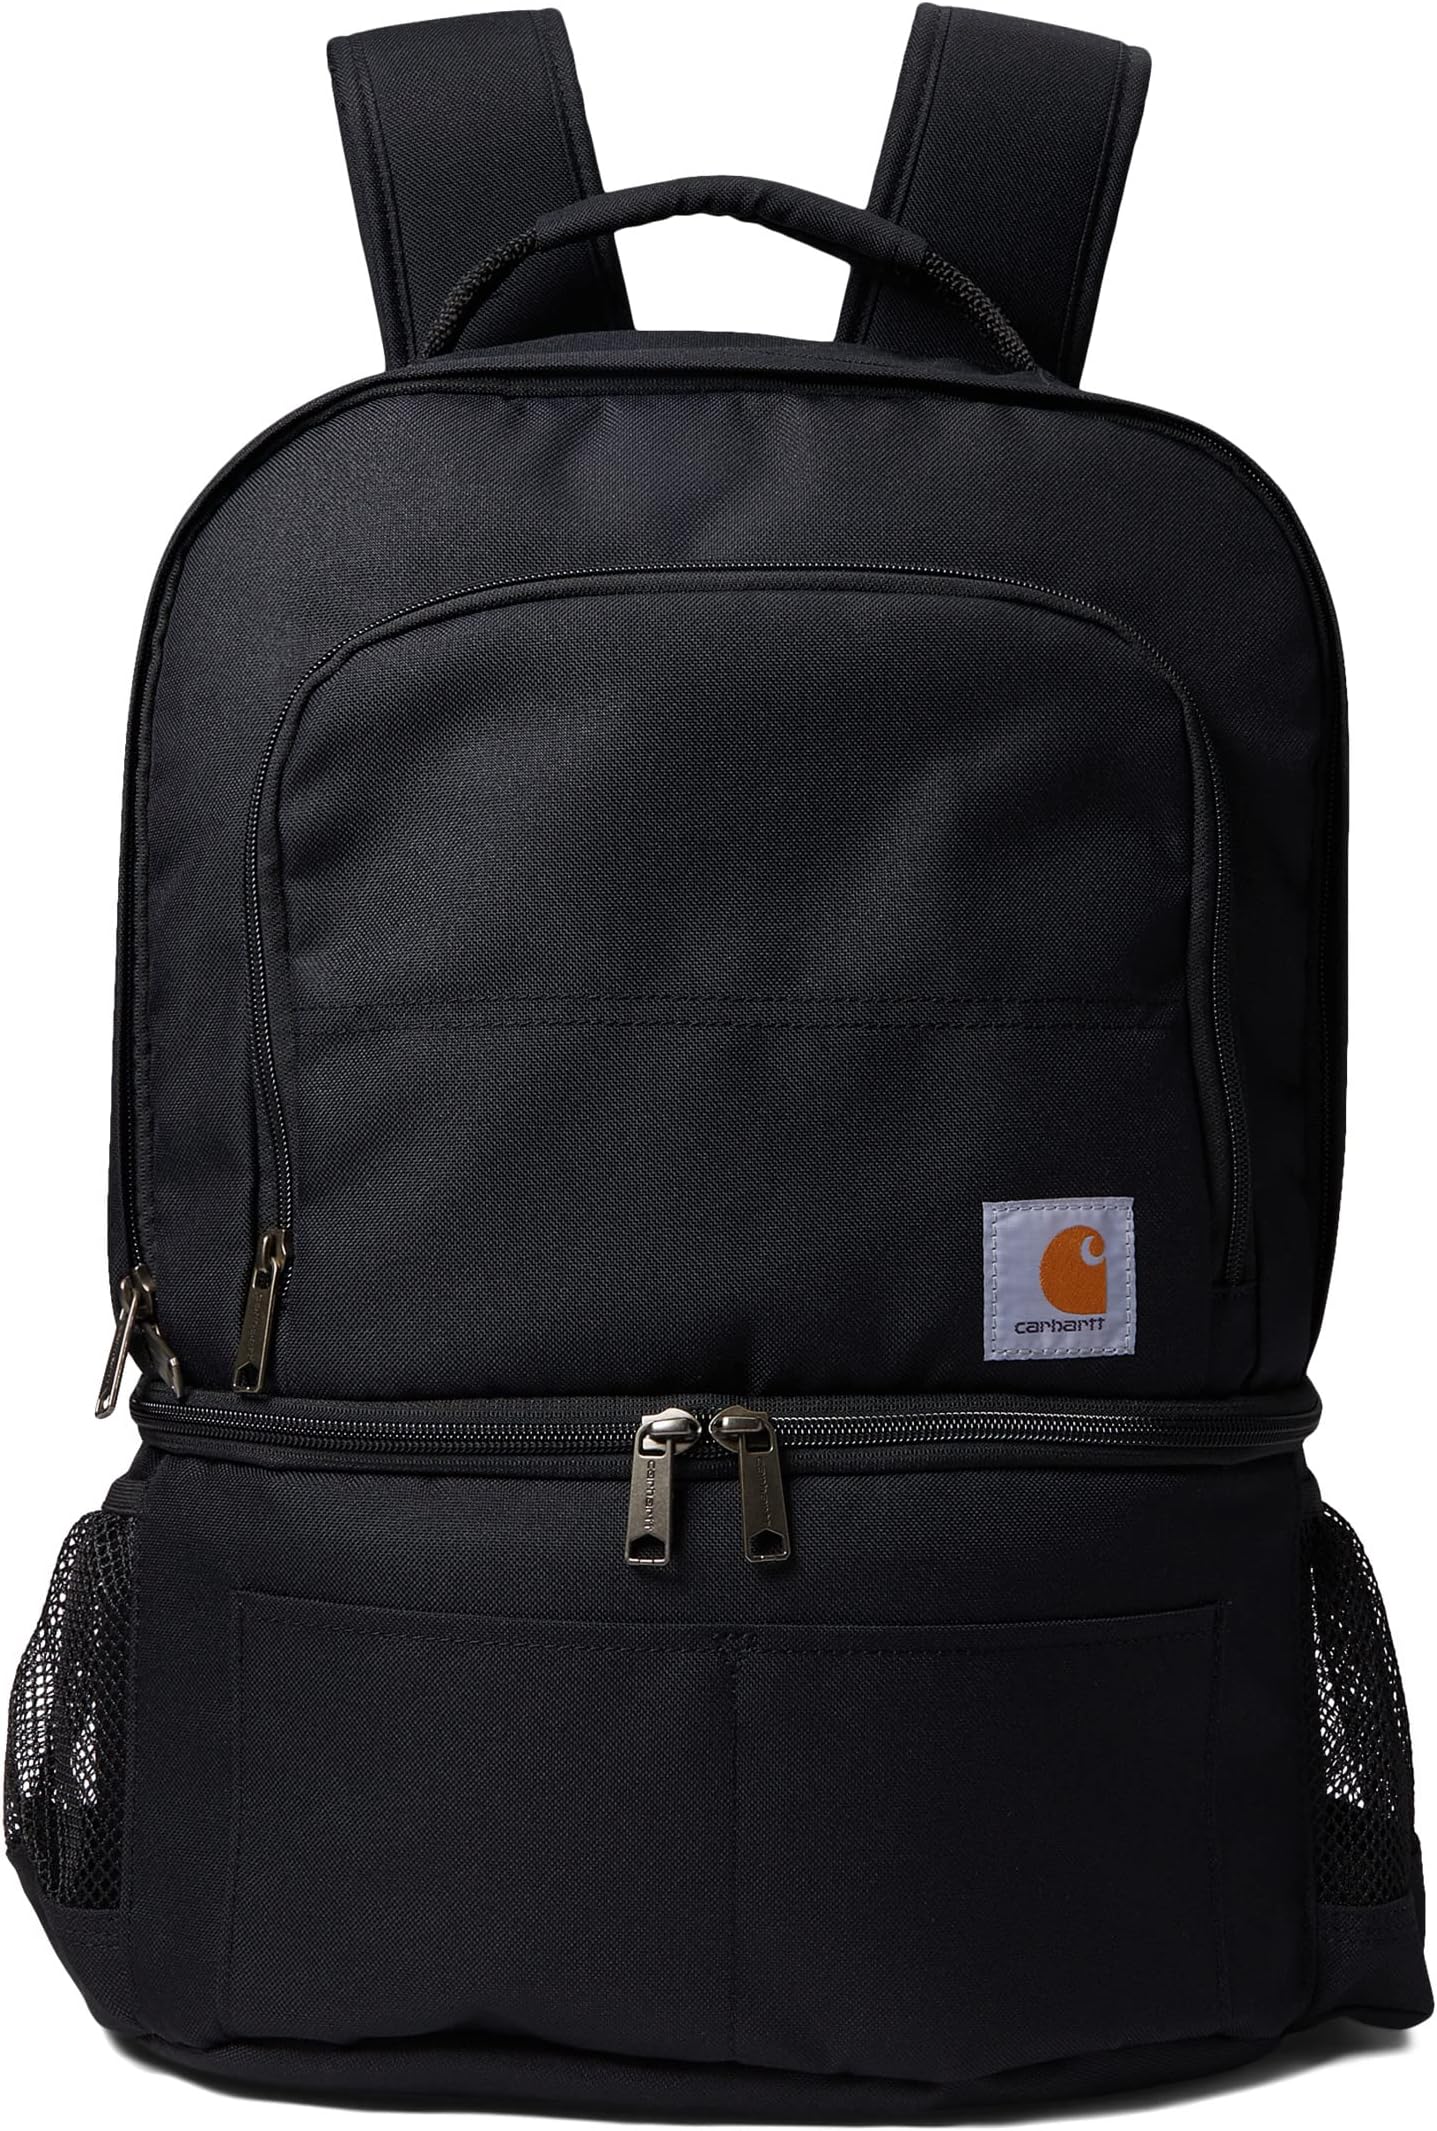 Рюкзак Insulated 24 Can Two Compartment Cooler Backpack Carhartt, черный